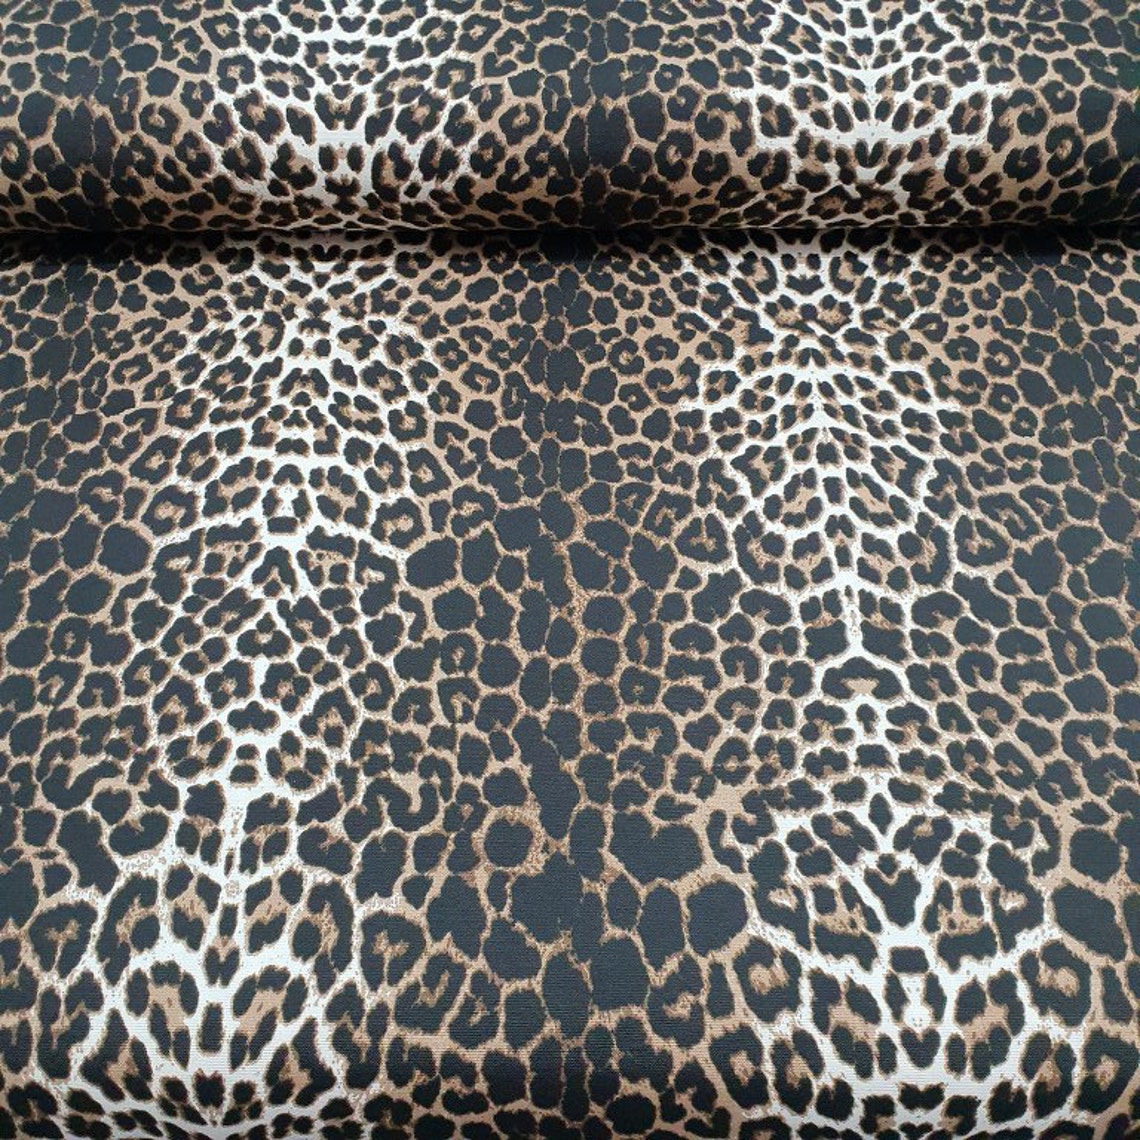 Black & White Leopard Print Cotton Fabric for Curtains Upholstery